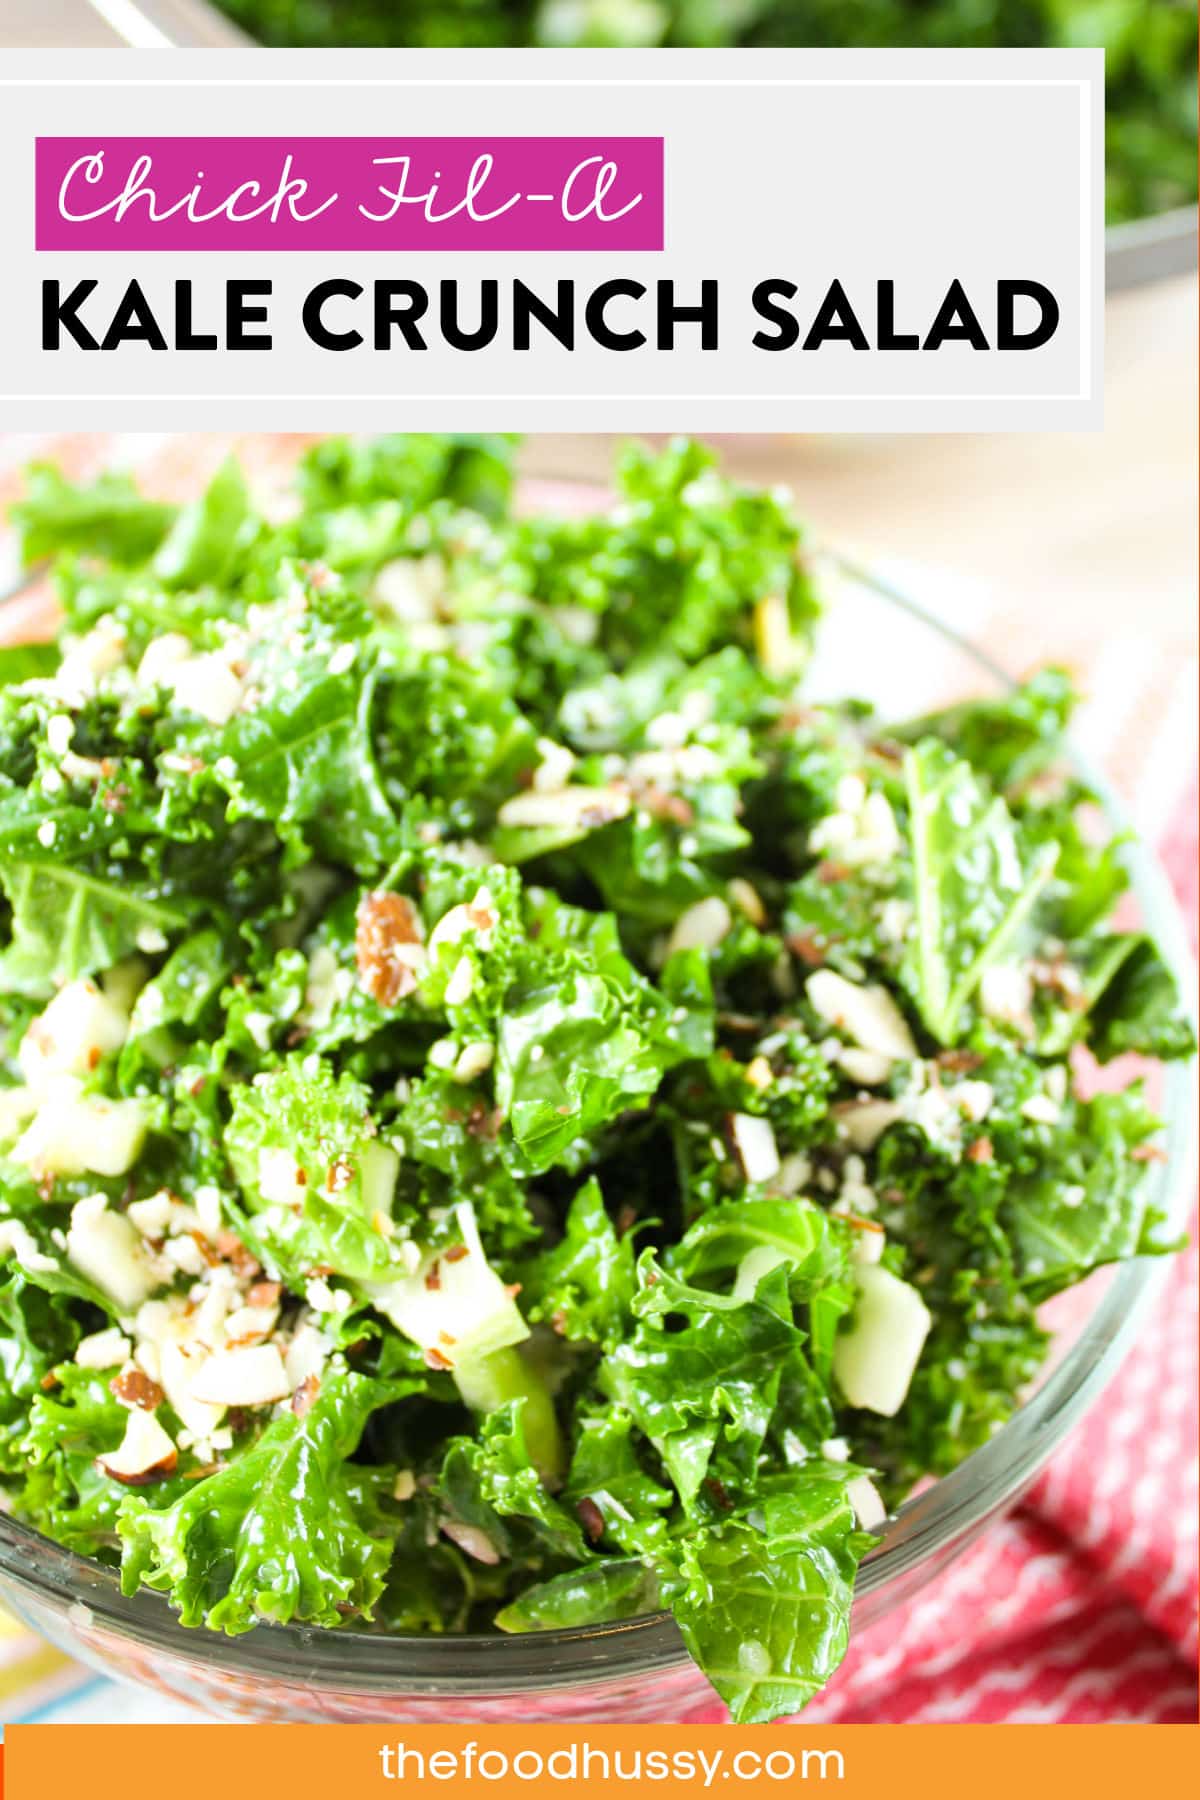 This copycat recipe for the Chick-fil-A Kale Crunch Salad is spot on with all of the flavors! Full of kale & cabbage in an apple dijon vinaigrette and topped with toasted almonds - it's a great side dish for any meal! via @foodhussy